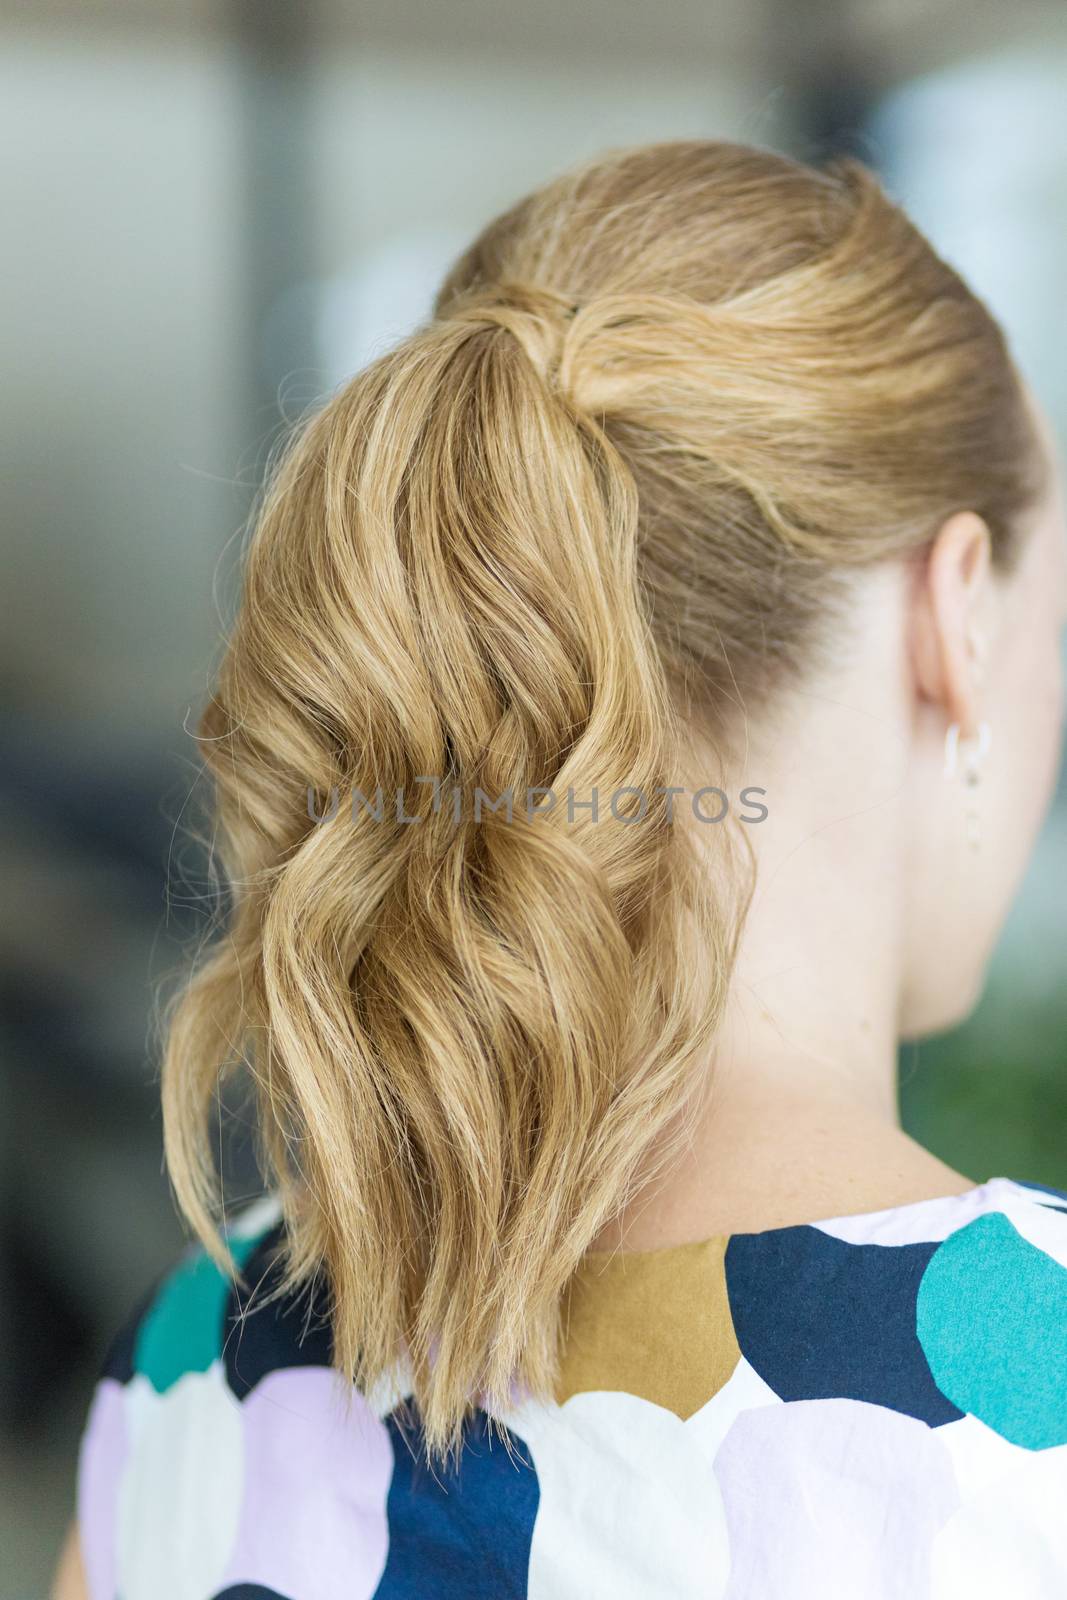 A young woman with long blond wavy hair tied in a ponytail. Back view.